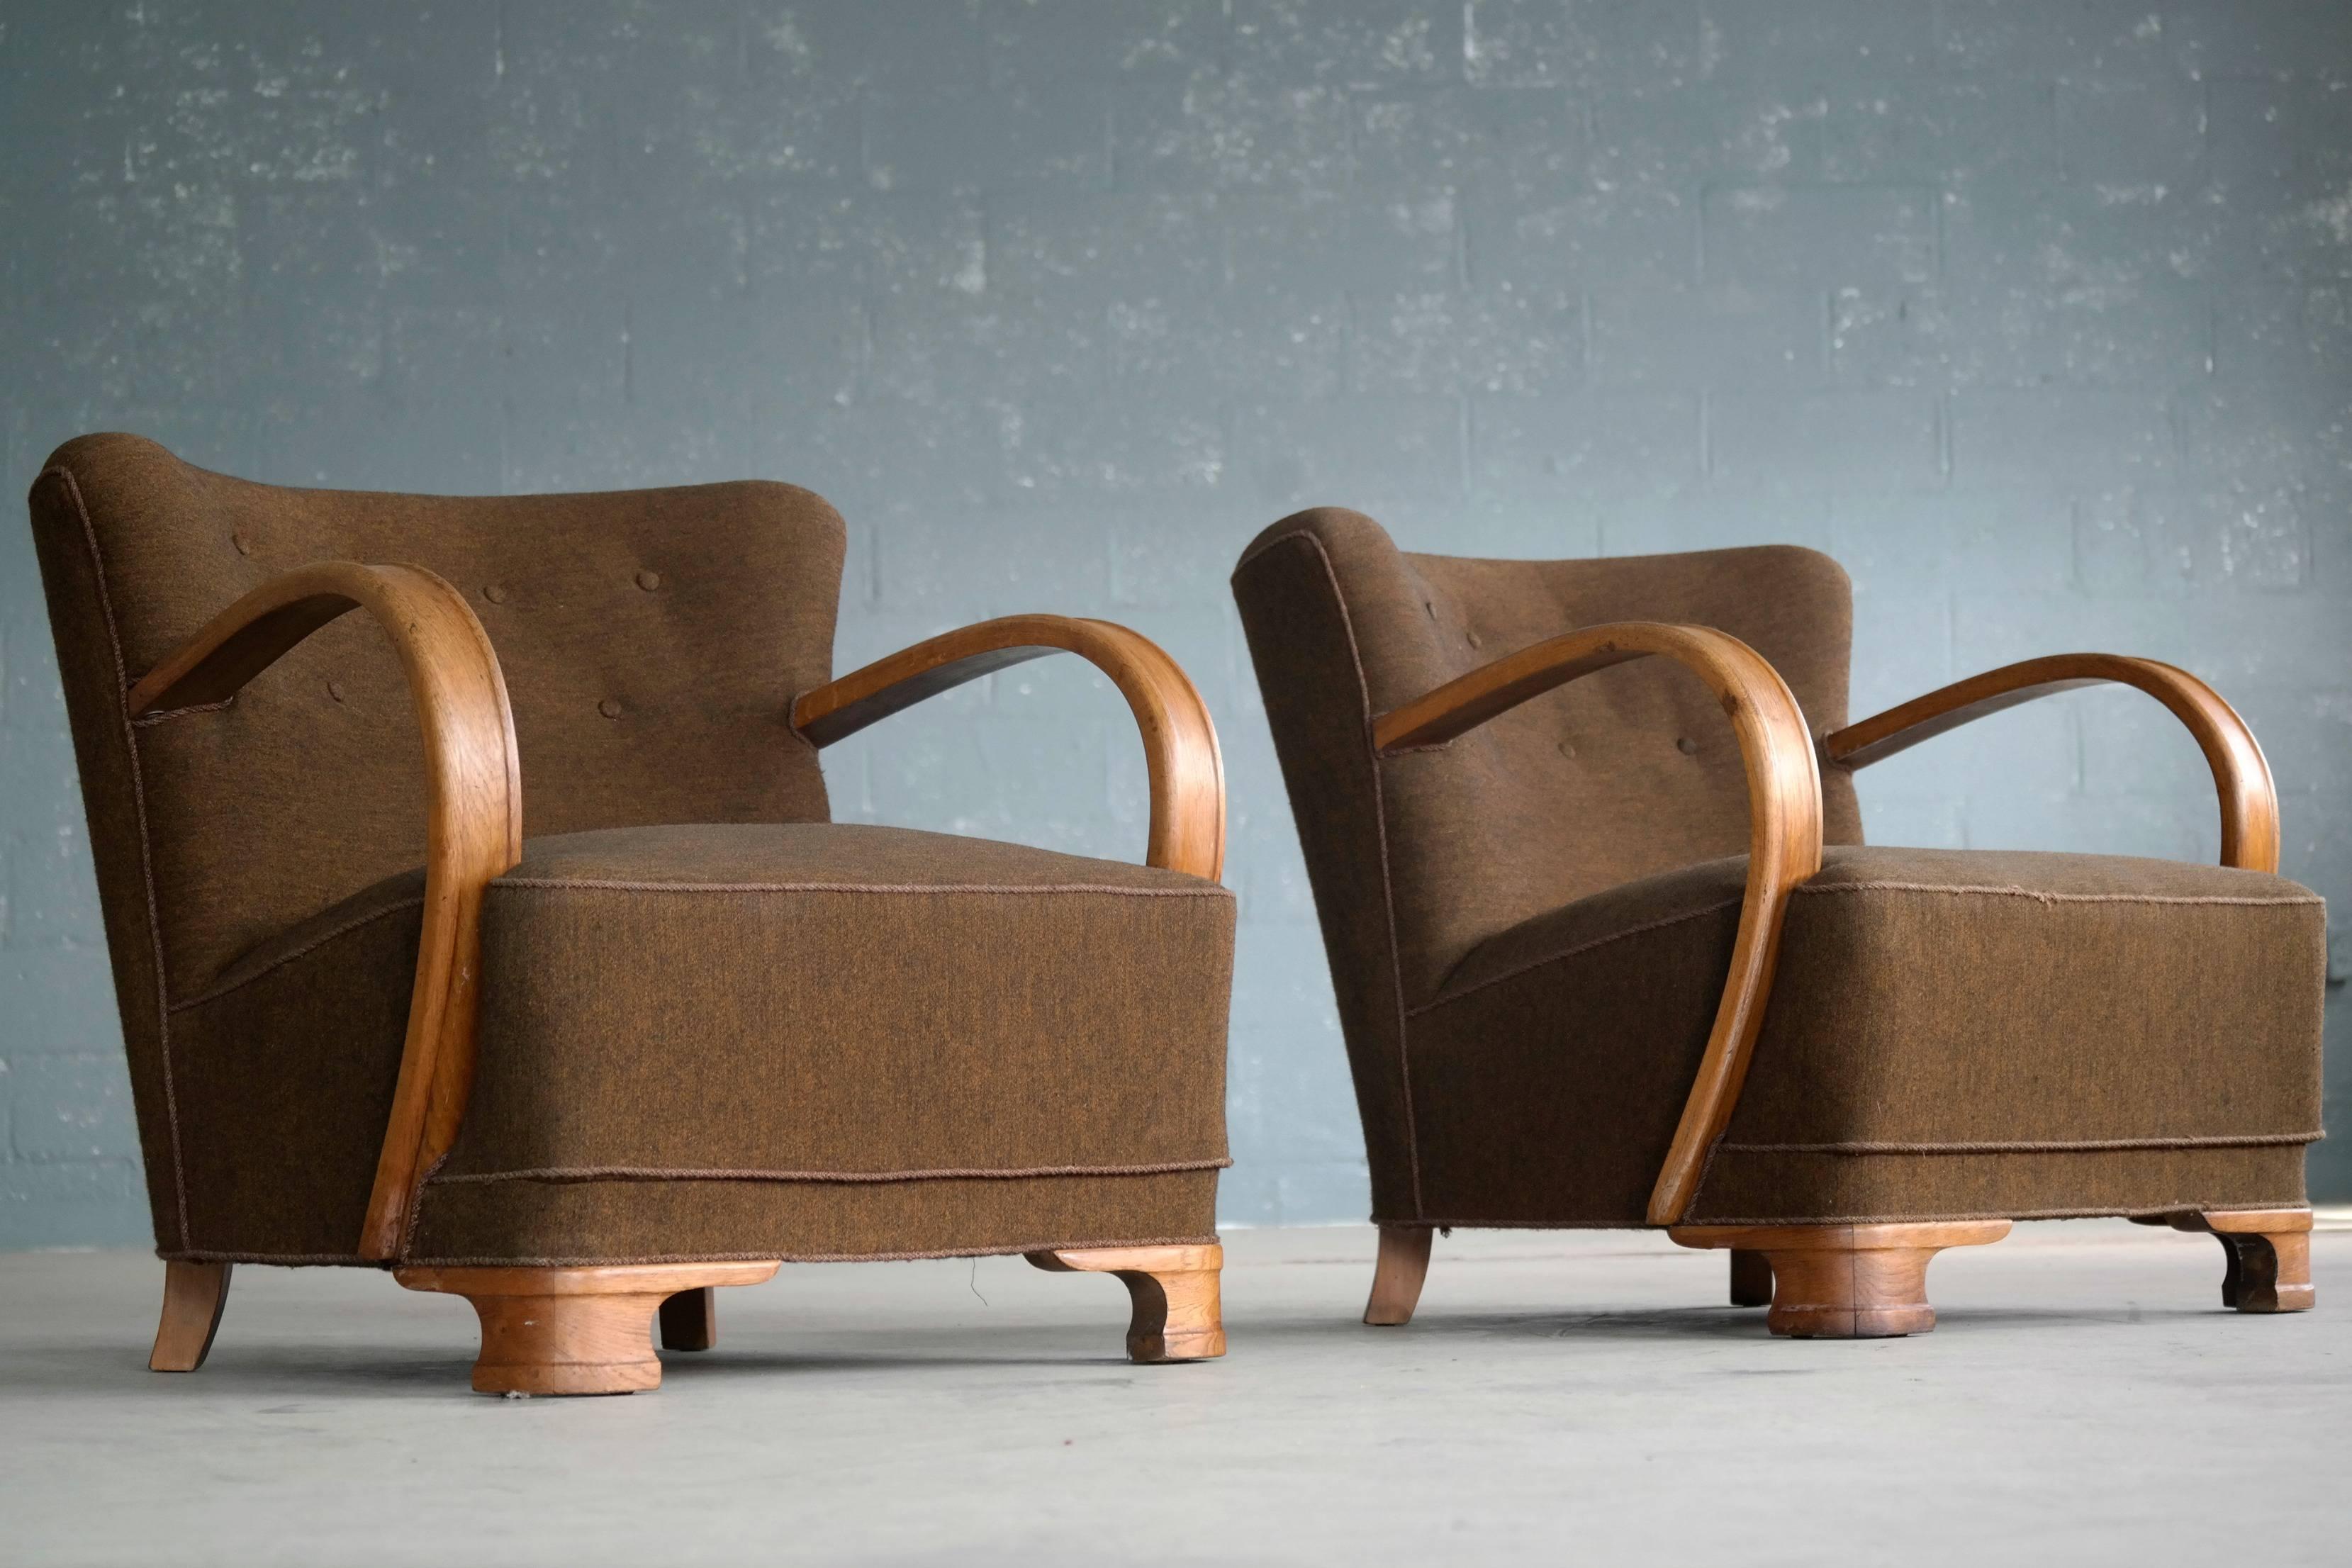 Superb pair of Danish Art Deco chairs from the early 1940s with spring cushions and solid oak armrests and feet in the style of Viggo Boesen and Flemming Lassen. Very expressive low slung proportions. Art Deco works very well in combination with any